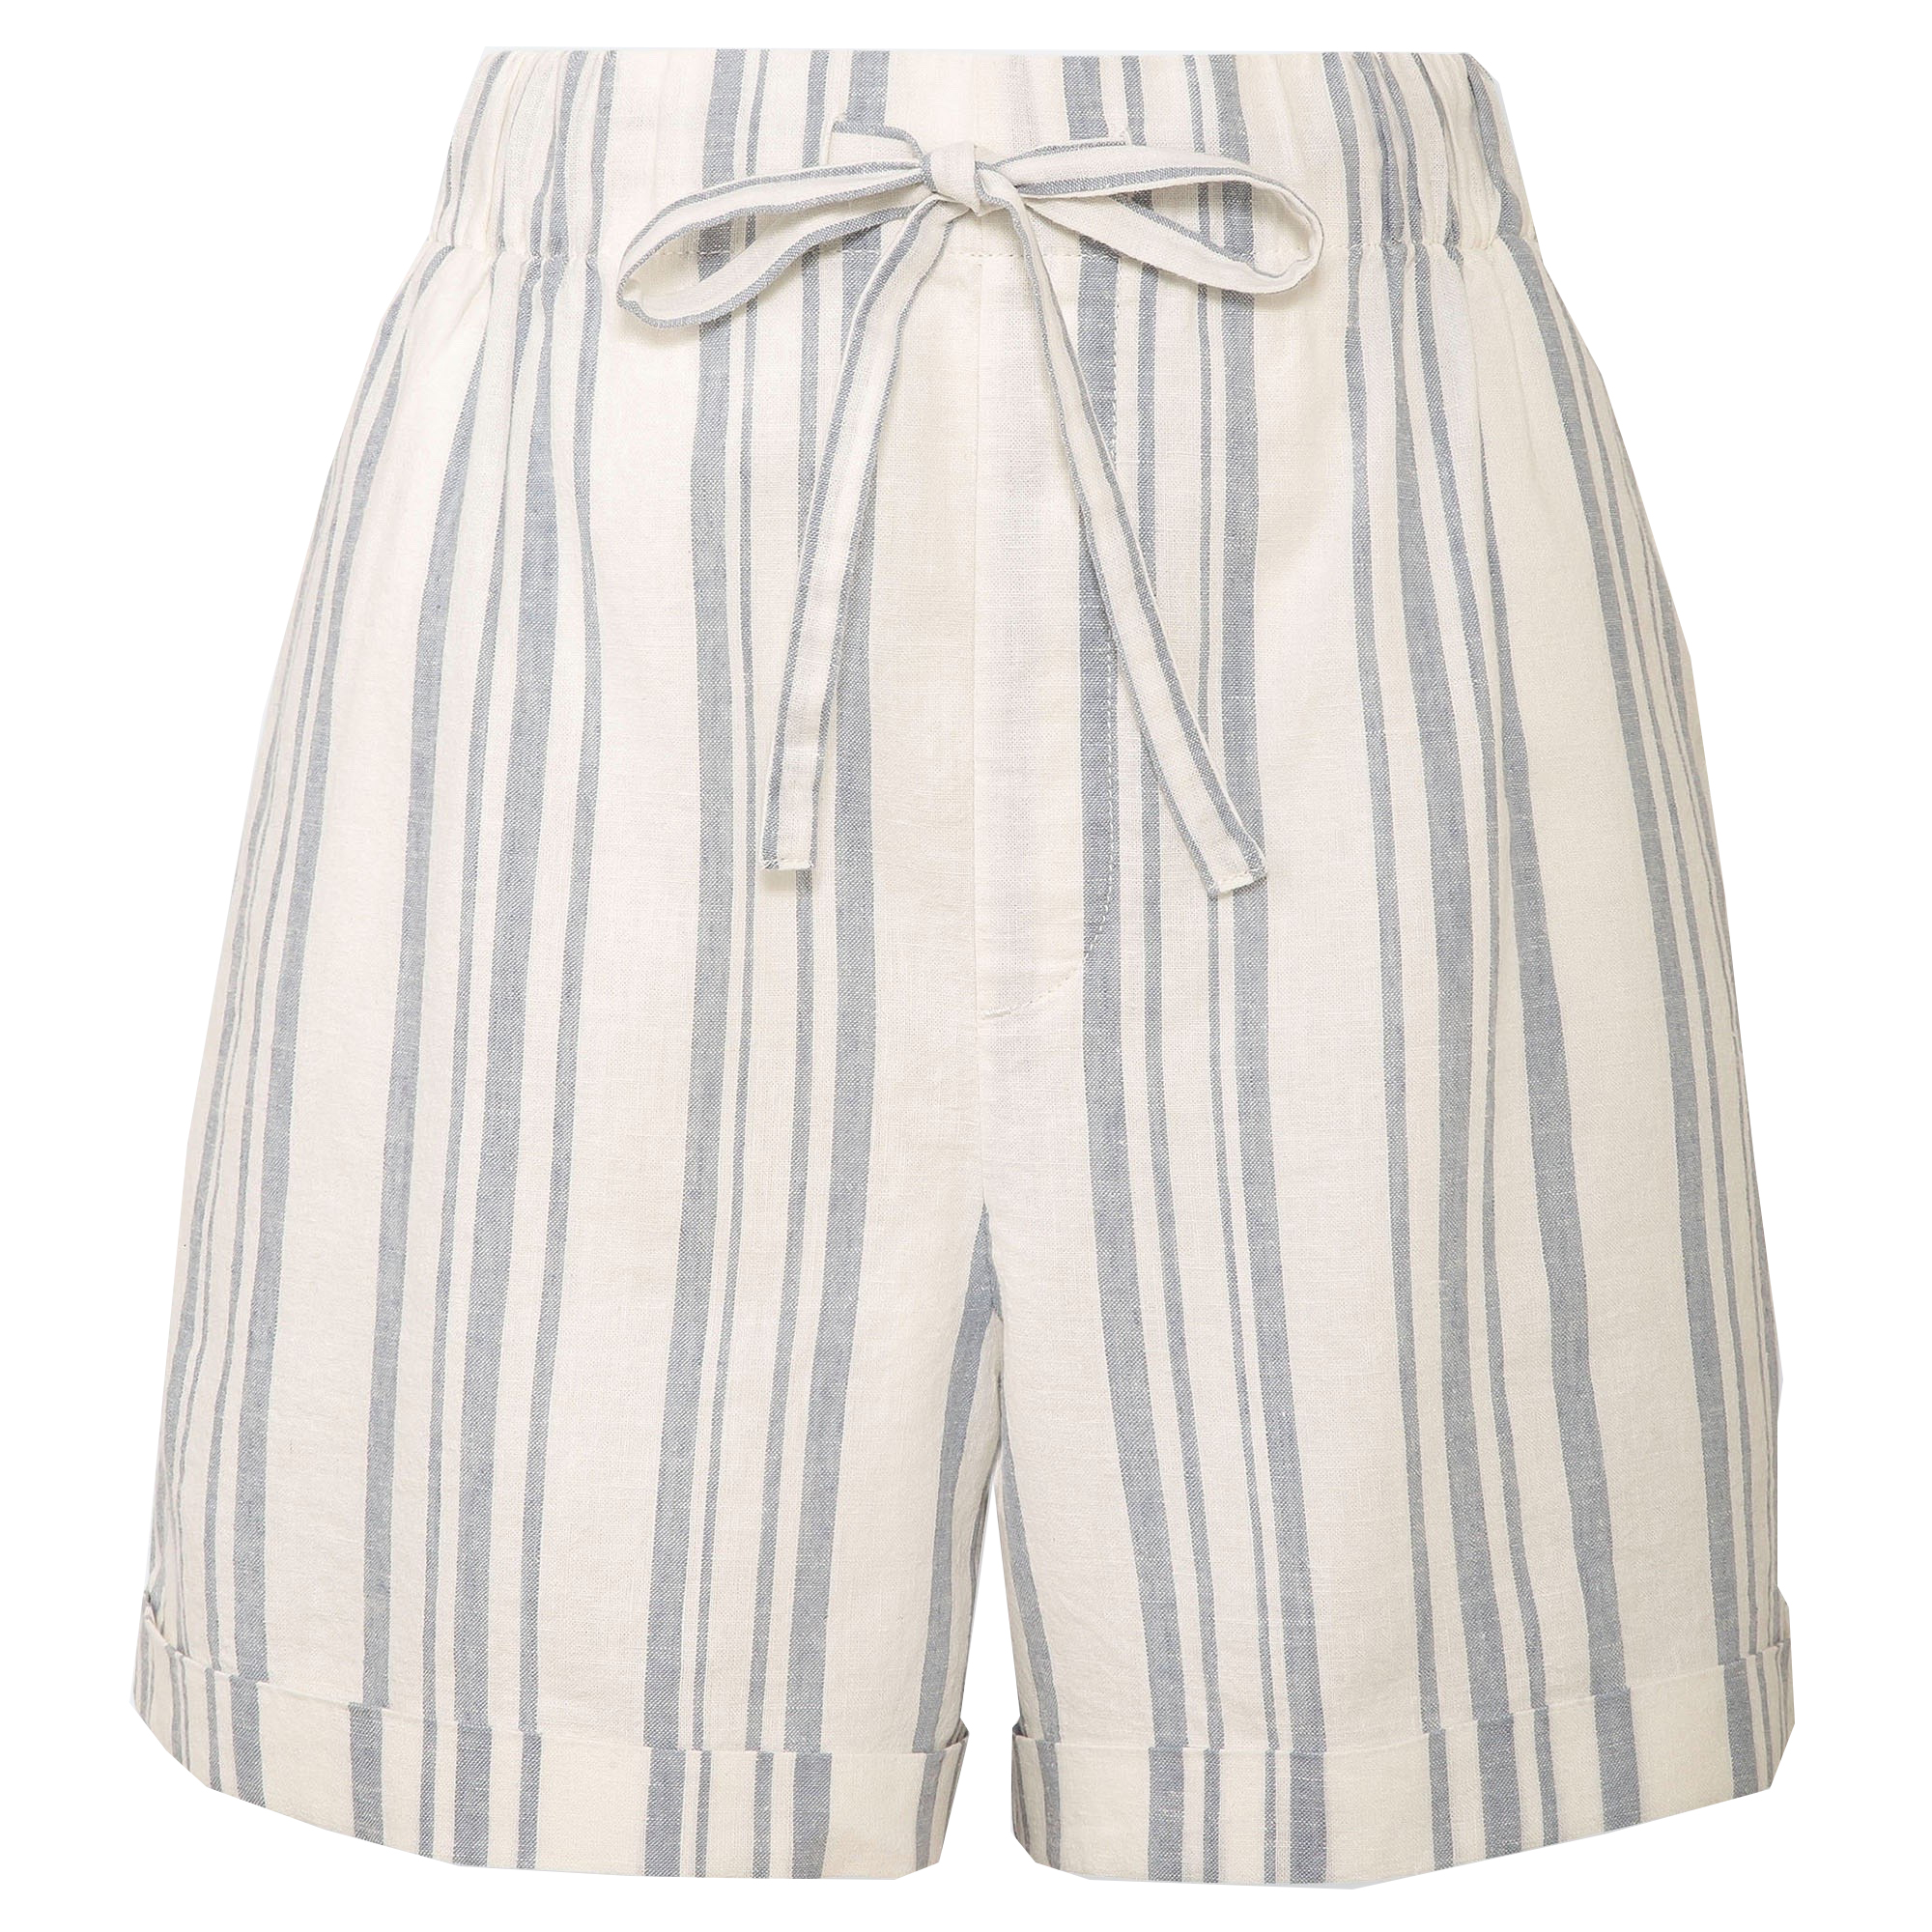 The stylist says that linen shorts are great for this summer